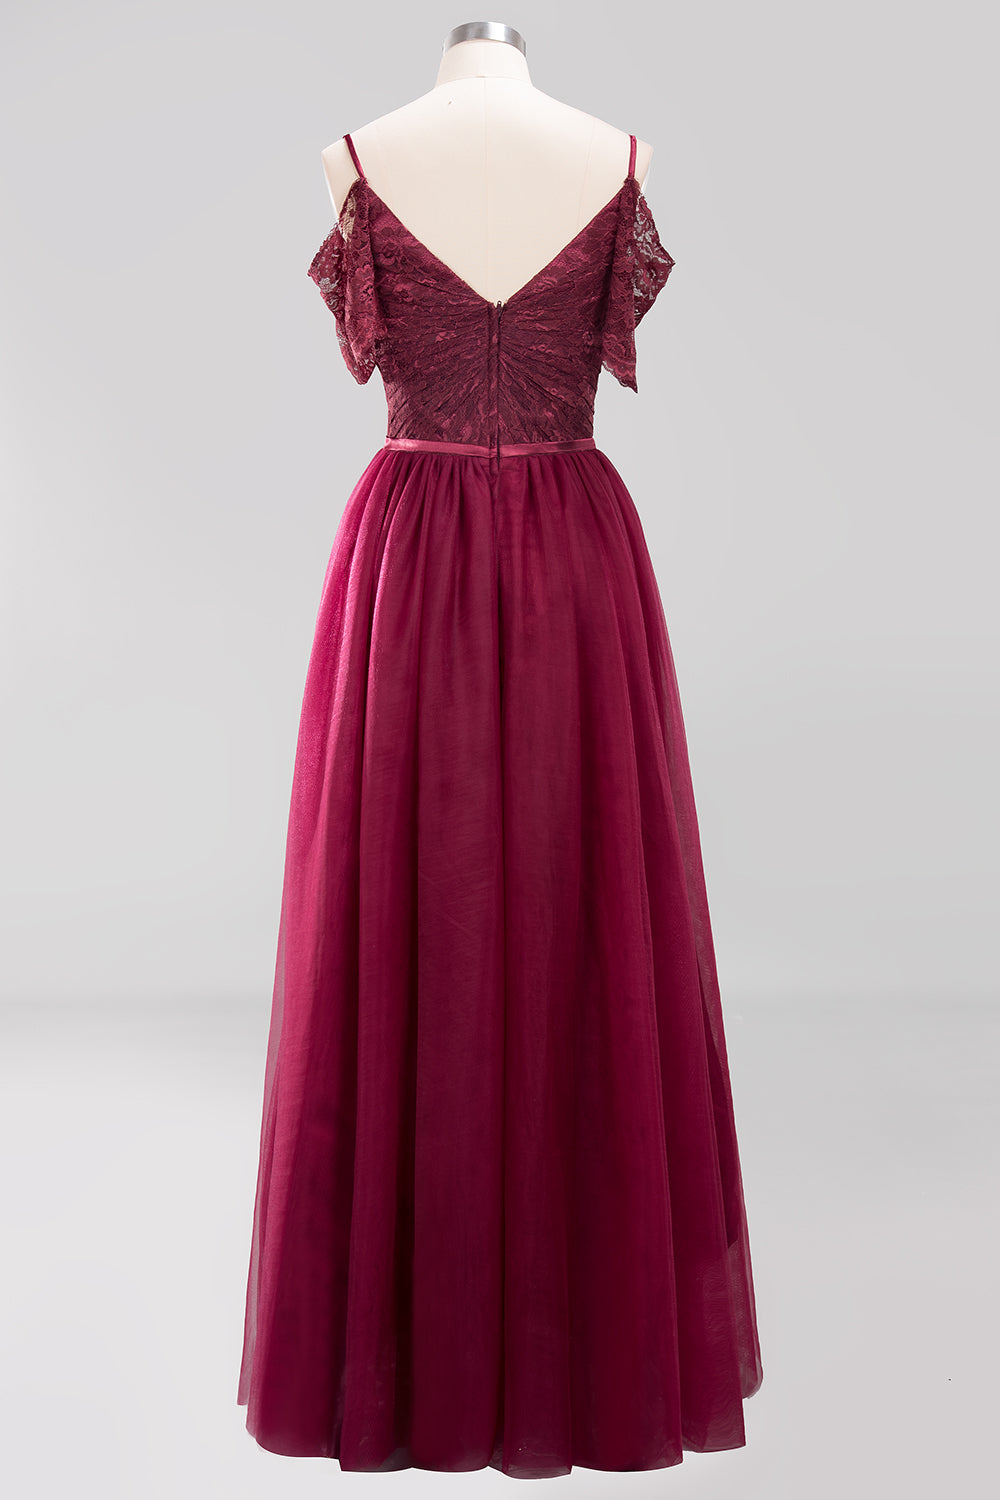 Affordable Chiffon Off-the-Shoulder Burgundy Lace Bridesmaid Dresses